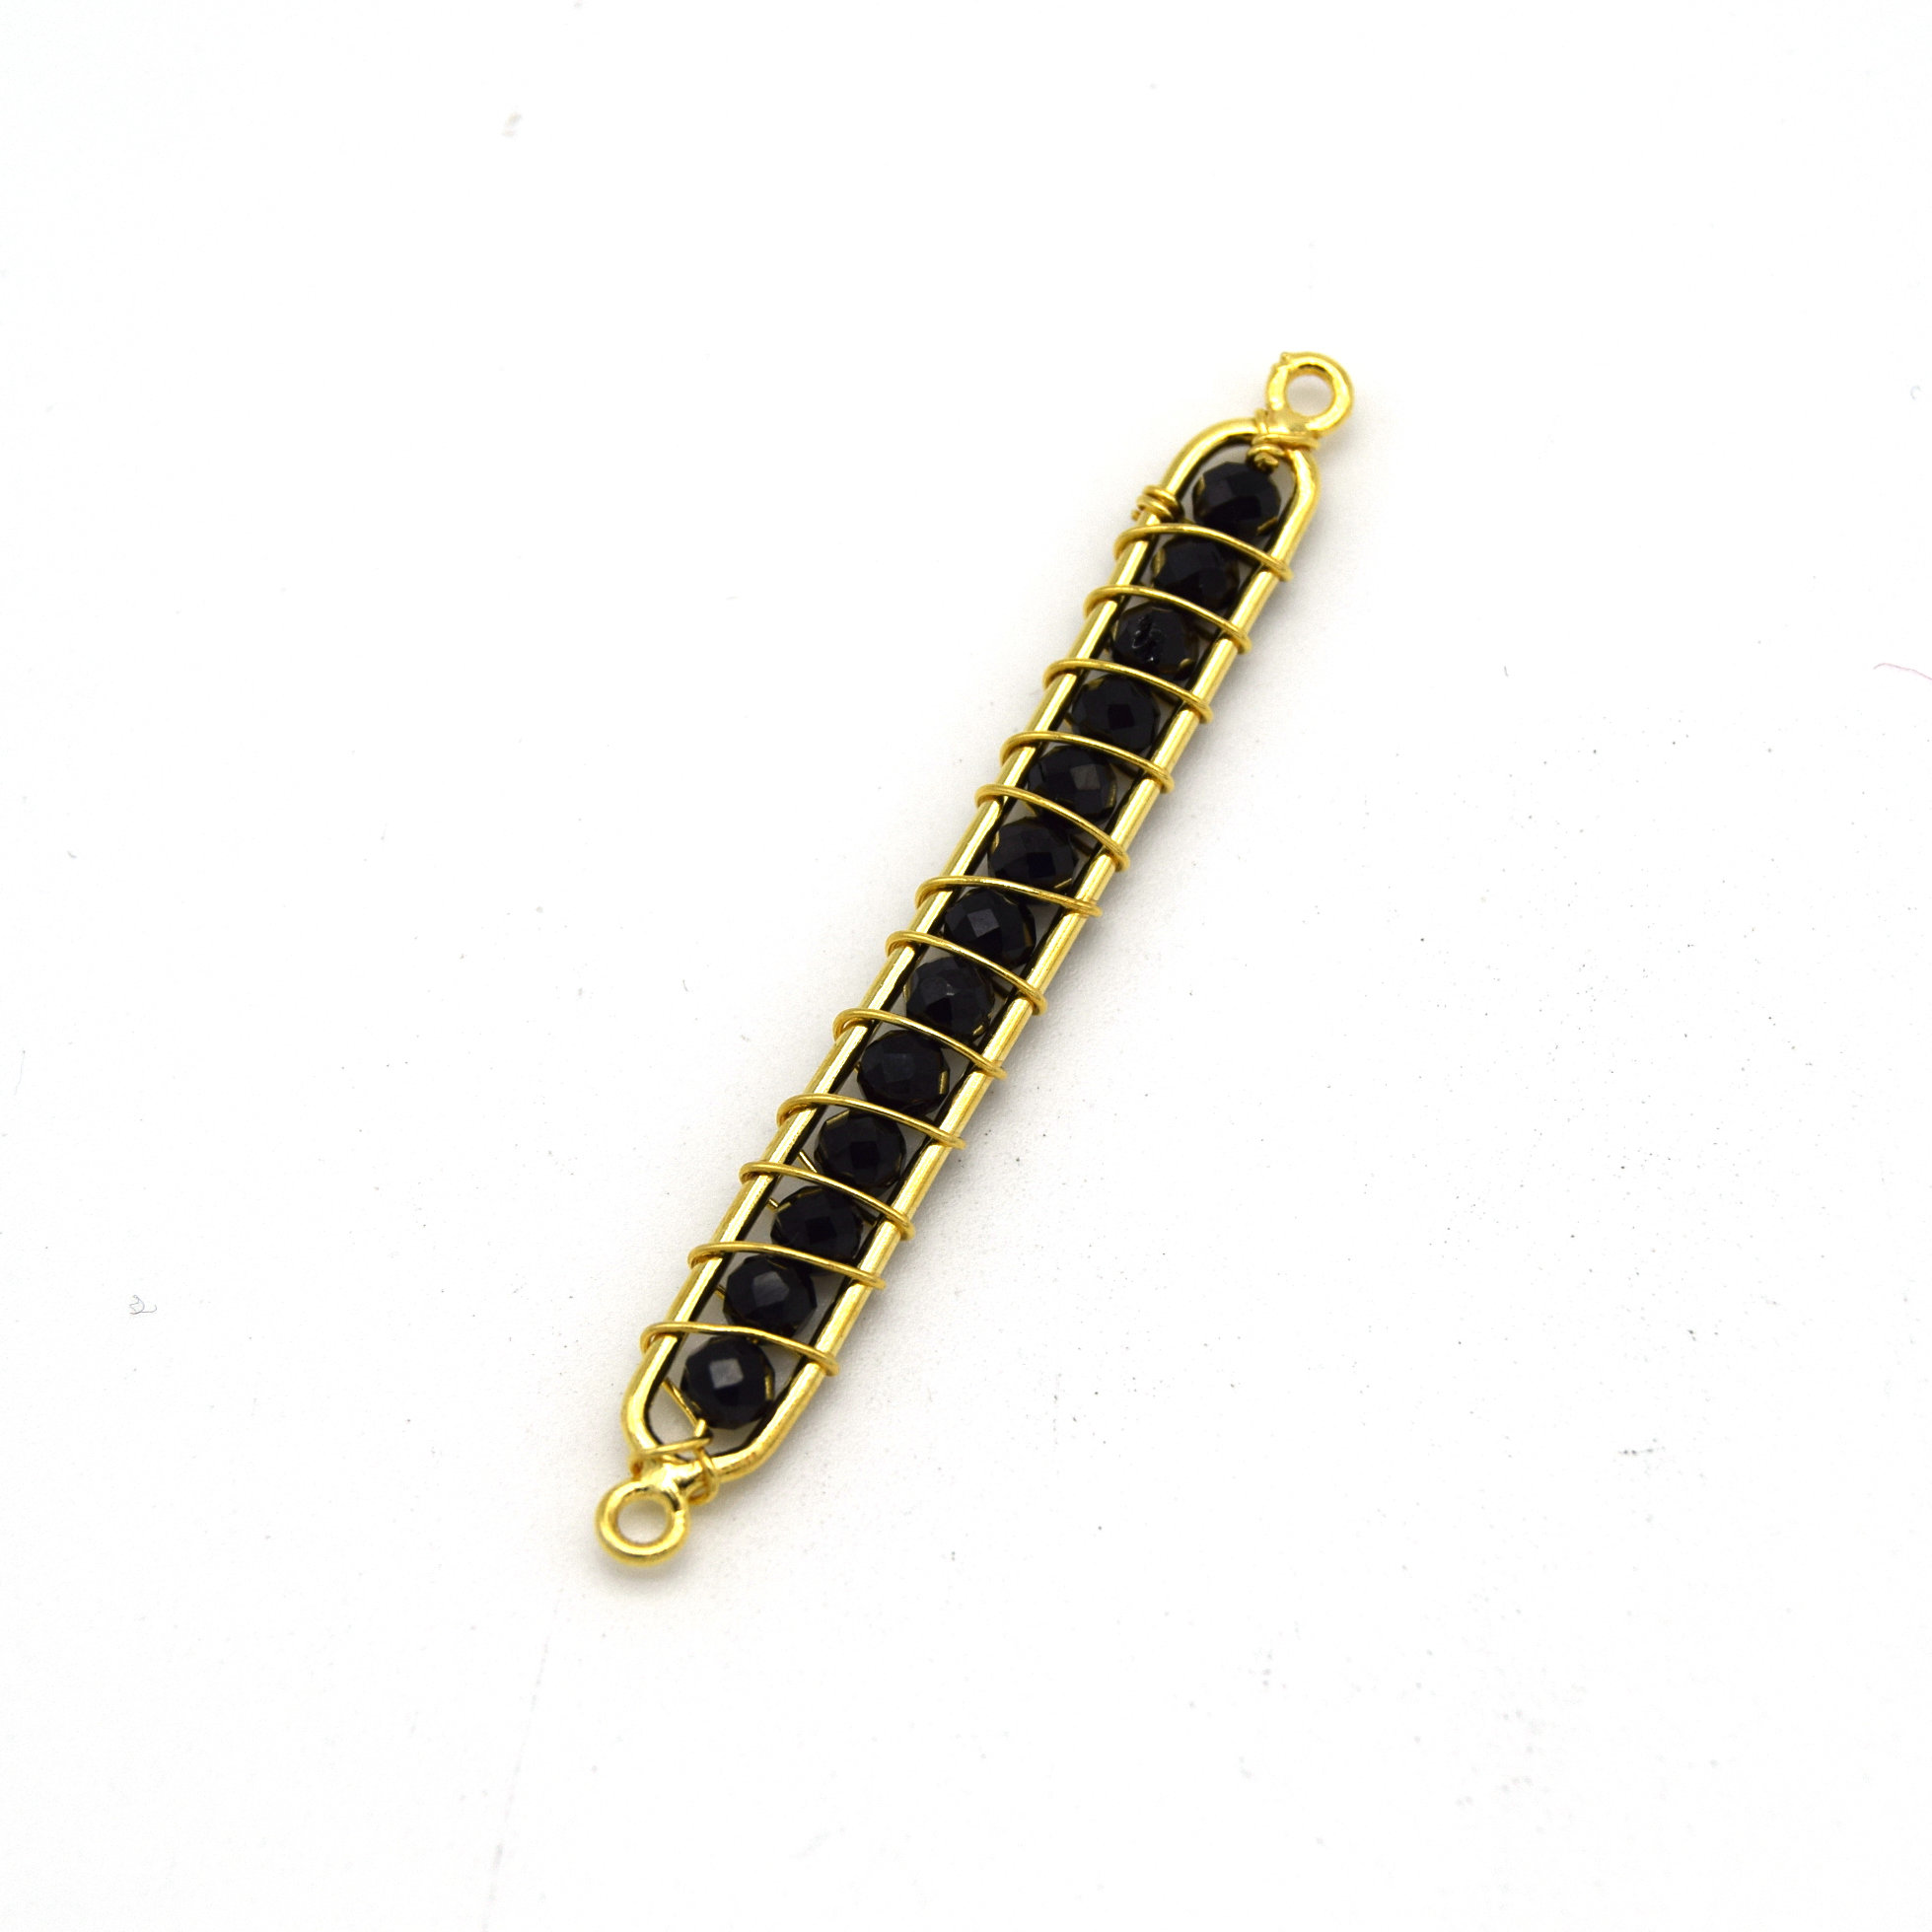 Black Spinel Bezel | 42mm X 4mm Gold Wire Wrapped Bead Inclosure Pendant Connector